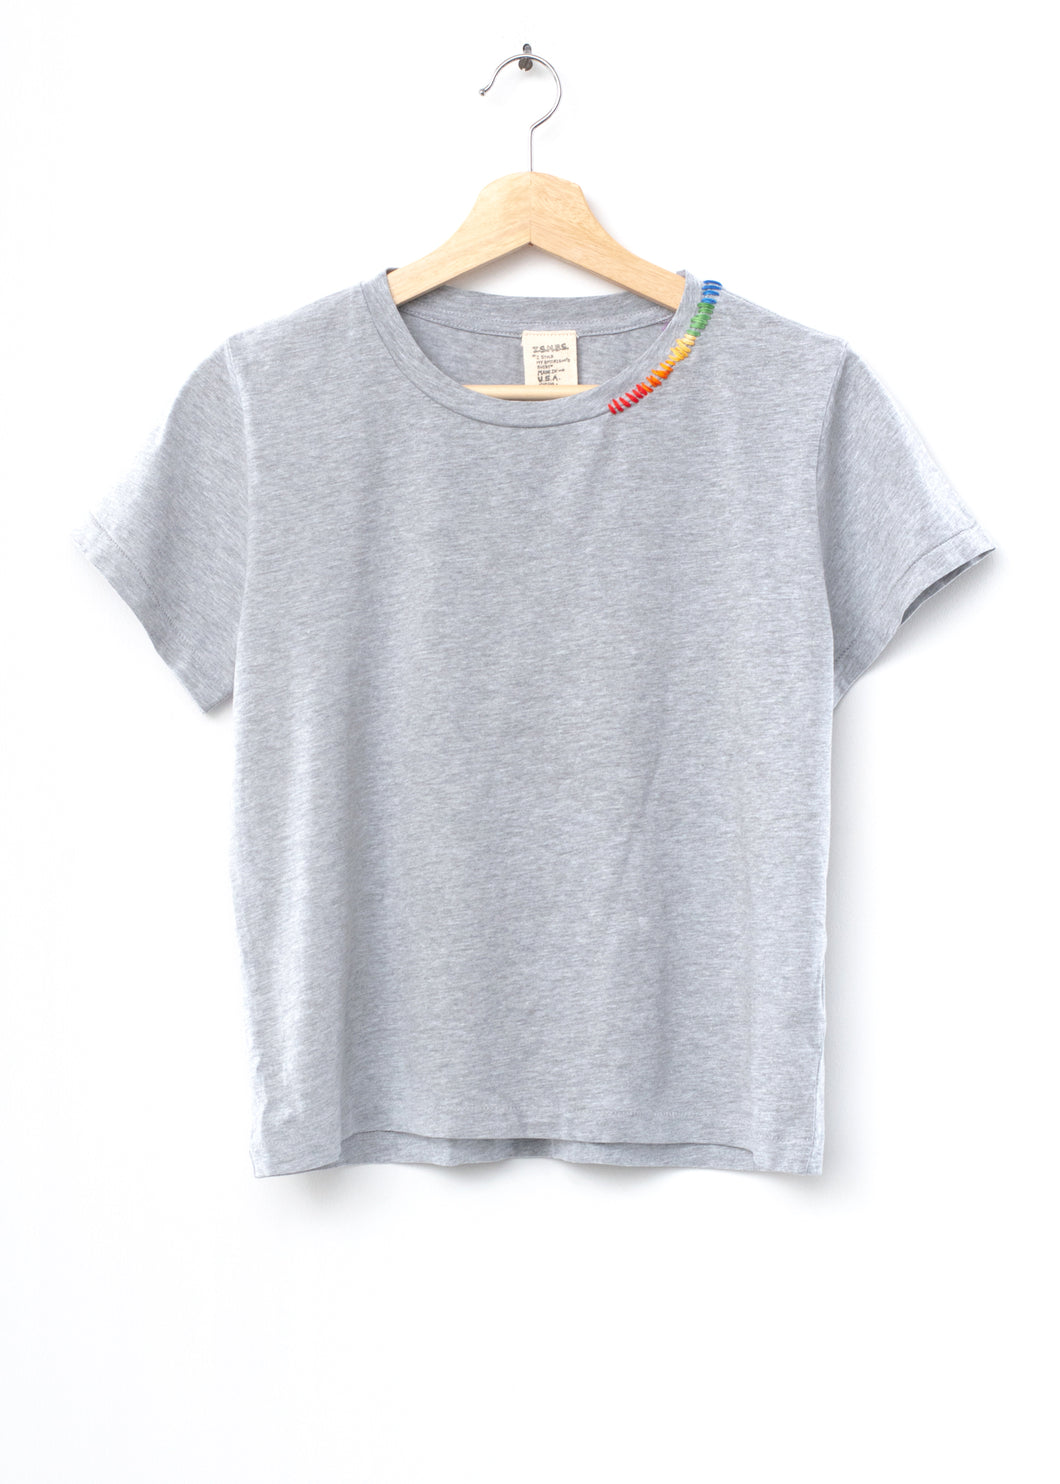 Rainbow Ombre Stitched Planet Tee(5 Colors)